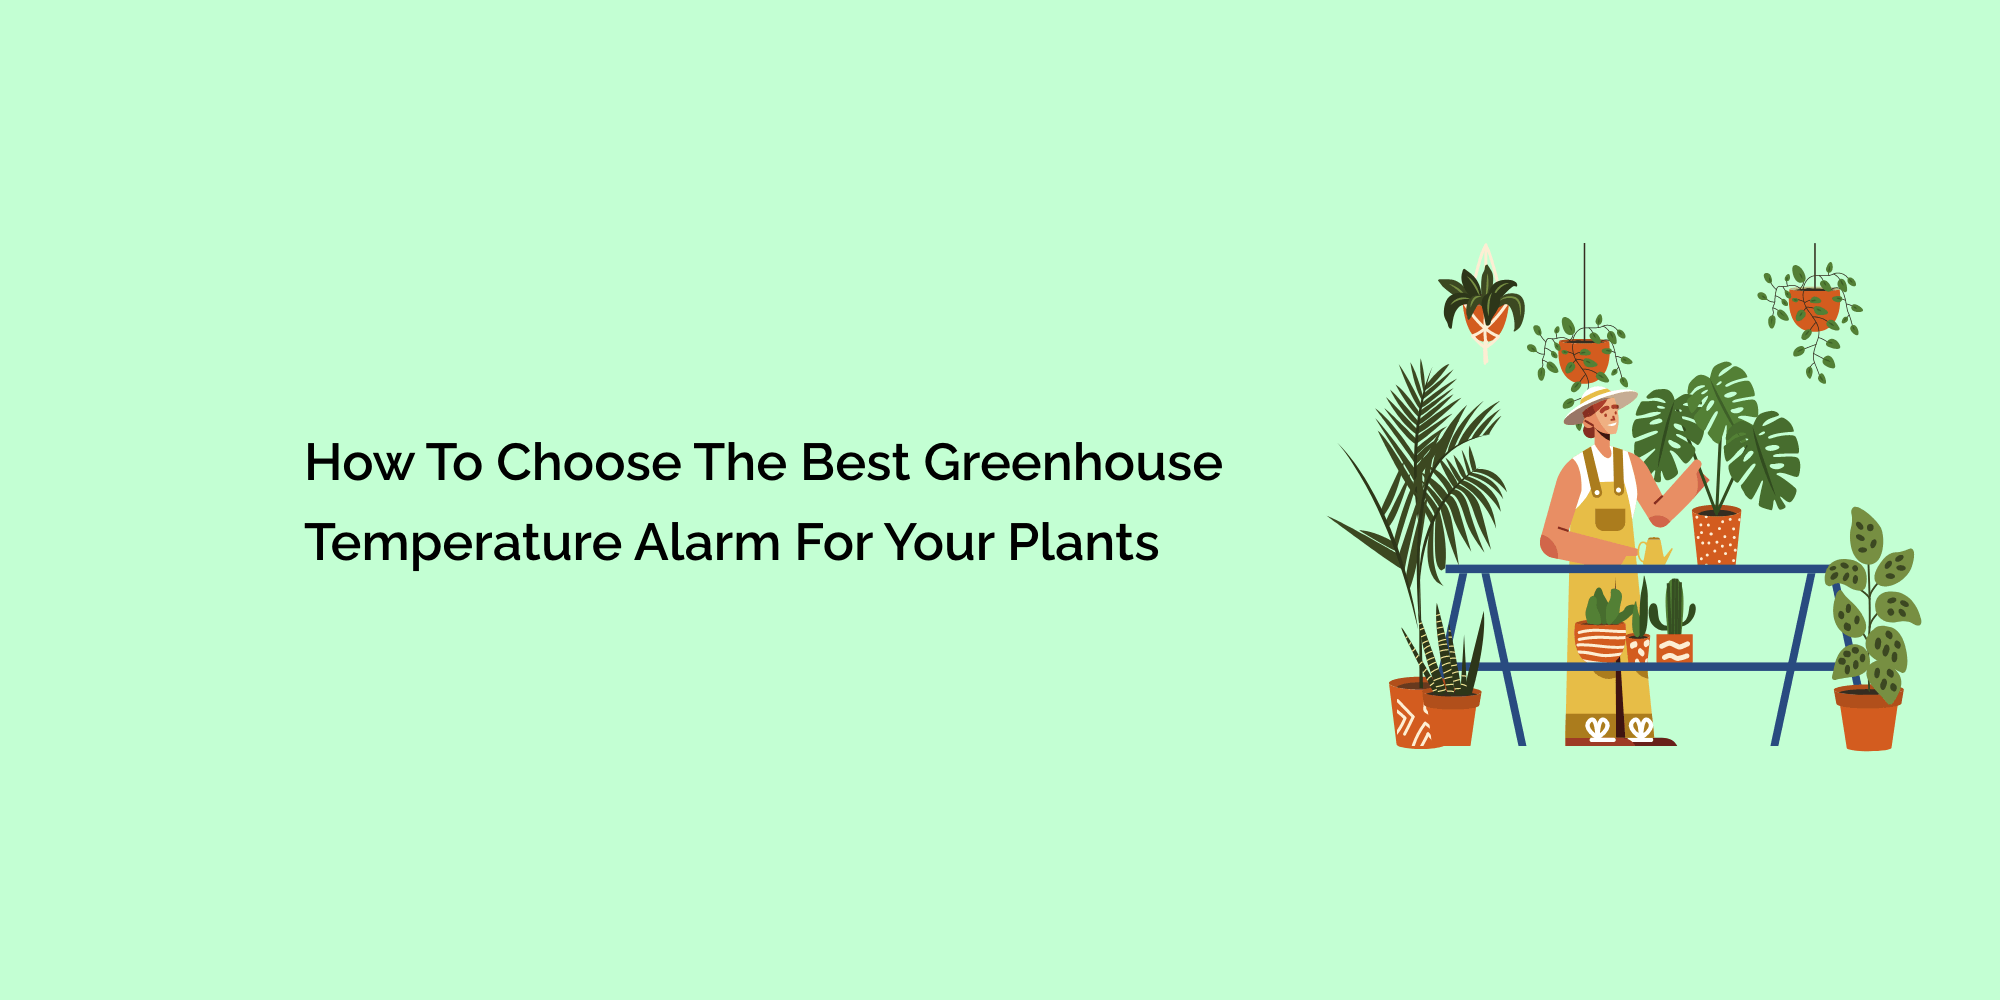 How to Choose the Best Greenhouse Temperature Alarm for Your Plants